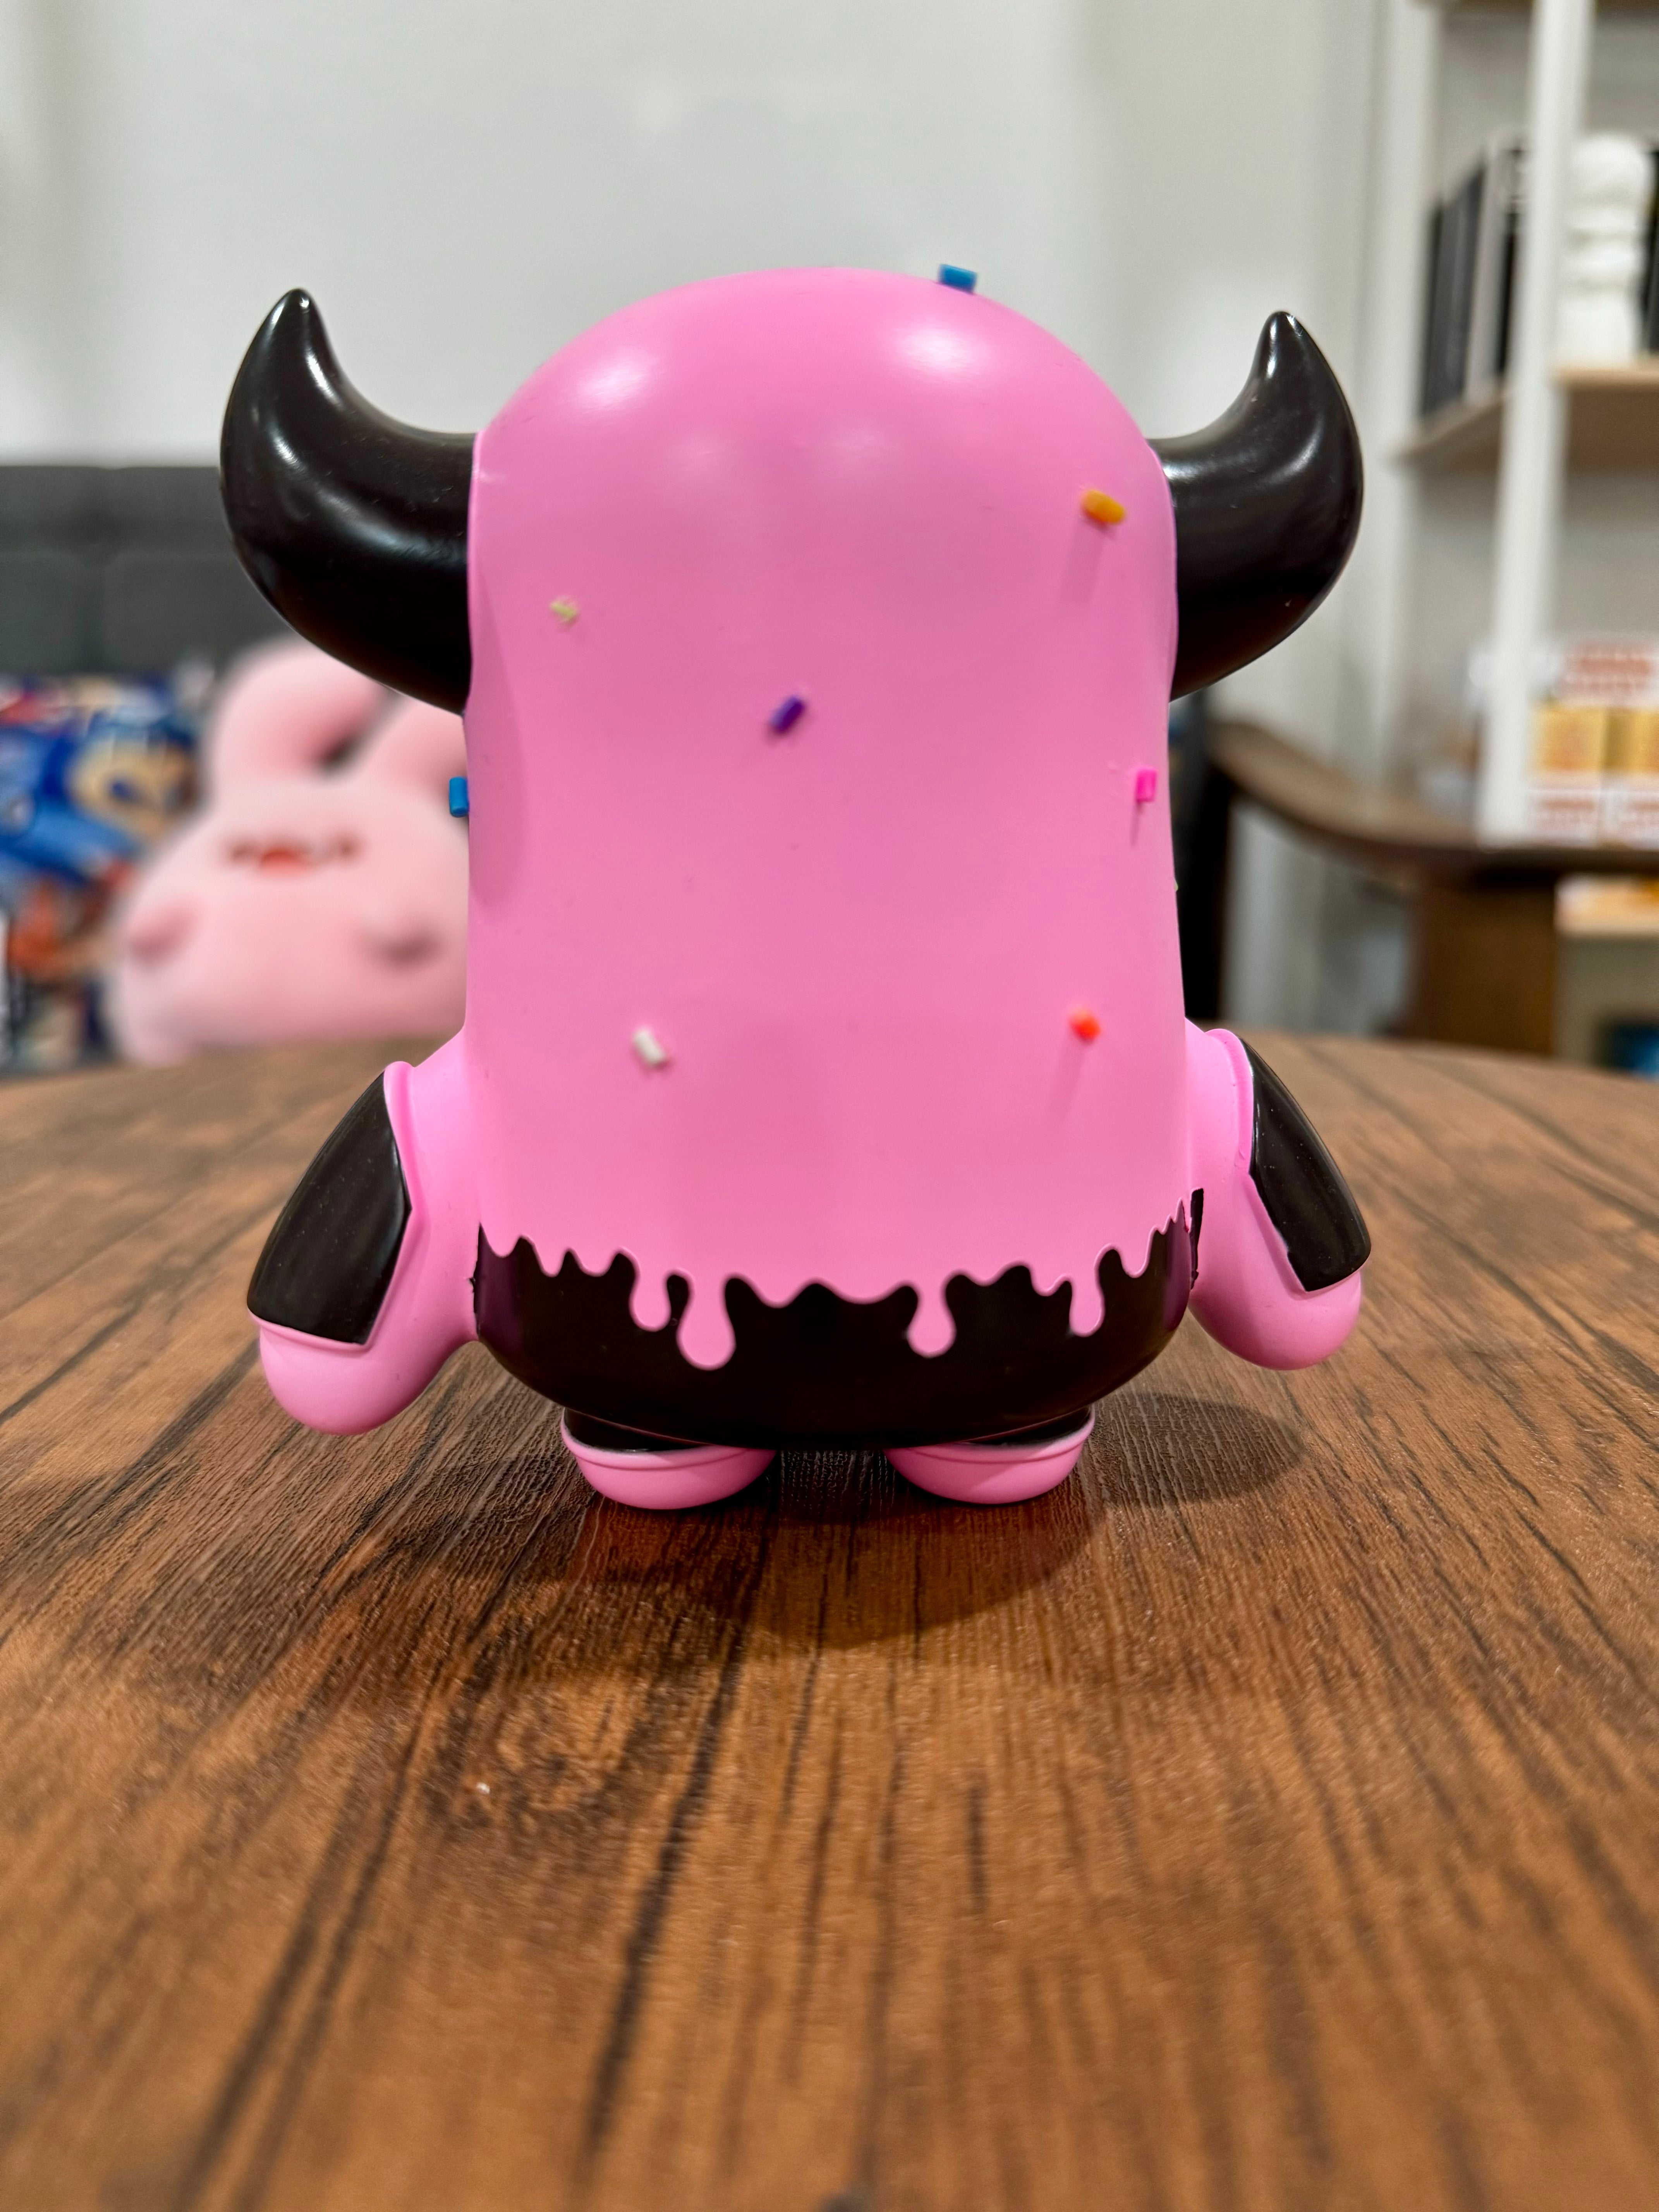 A blind box Sofubi toy, MASK BULL StrawBerry Spray Chocolate by CO2, featuring a pink and black animal figure. Ideal for collectors.